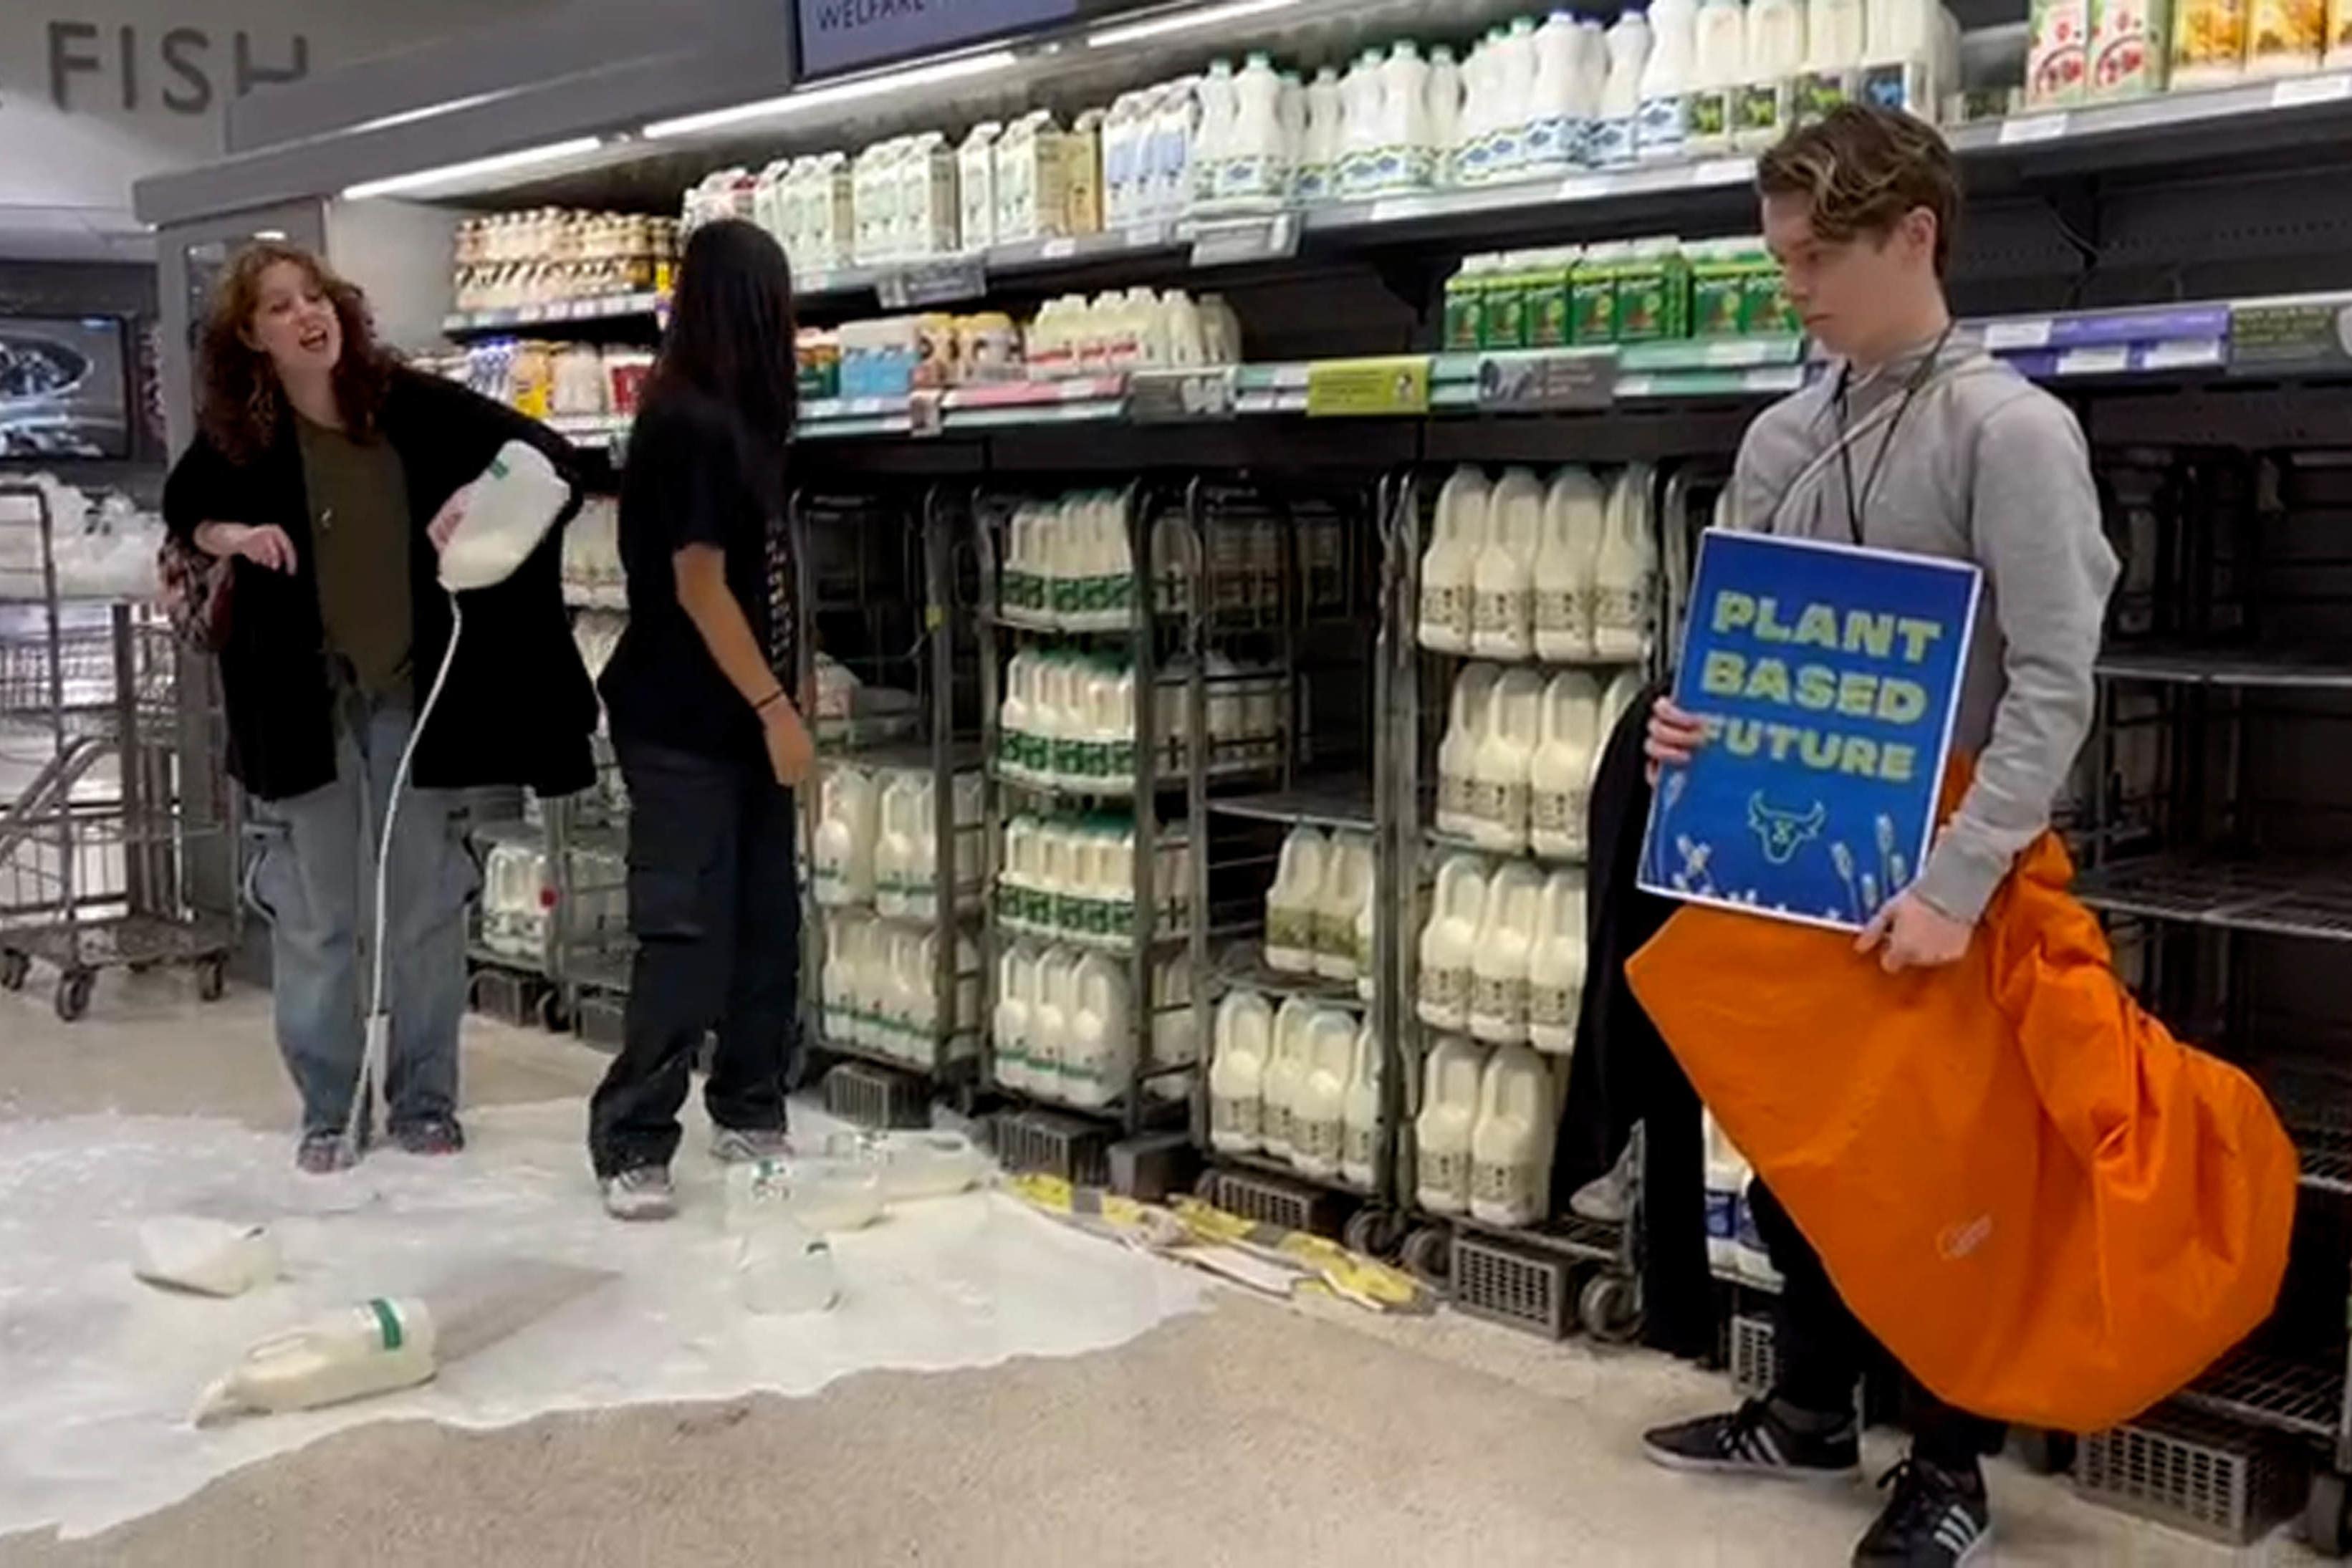 Animal Rebellion protesters pour milk in shops across UK – including  Harrods | The Independent